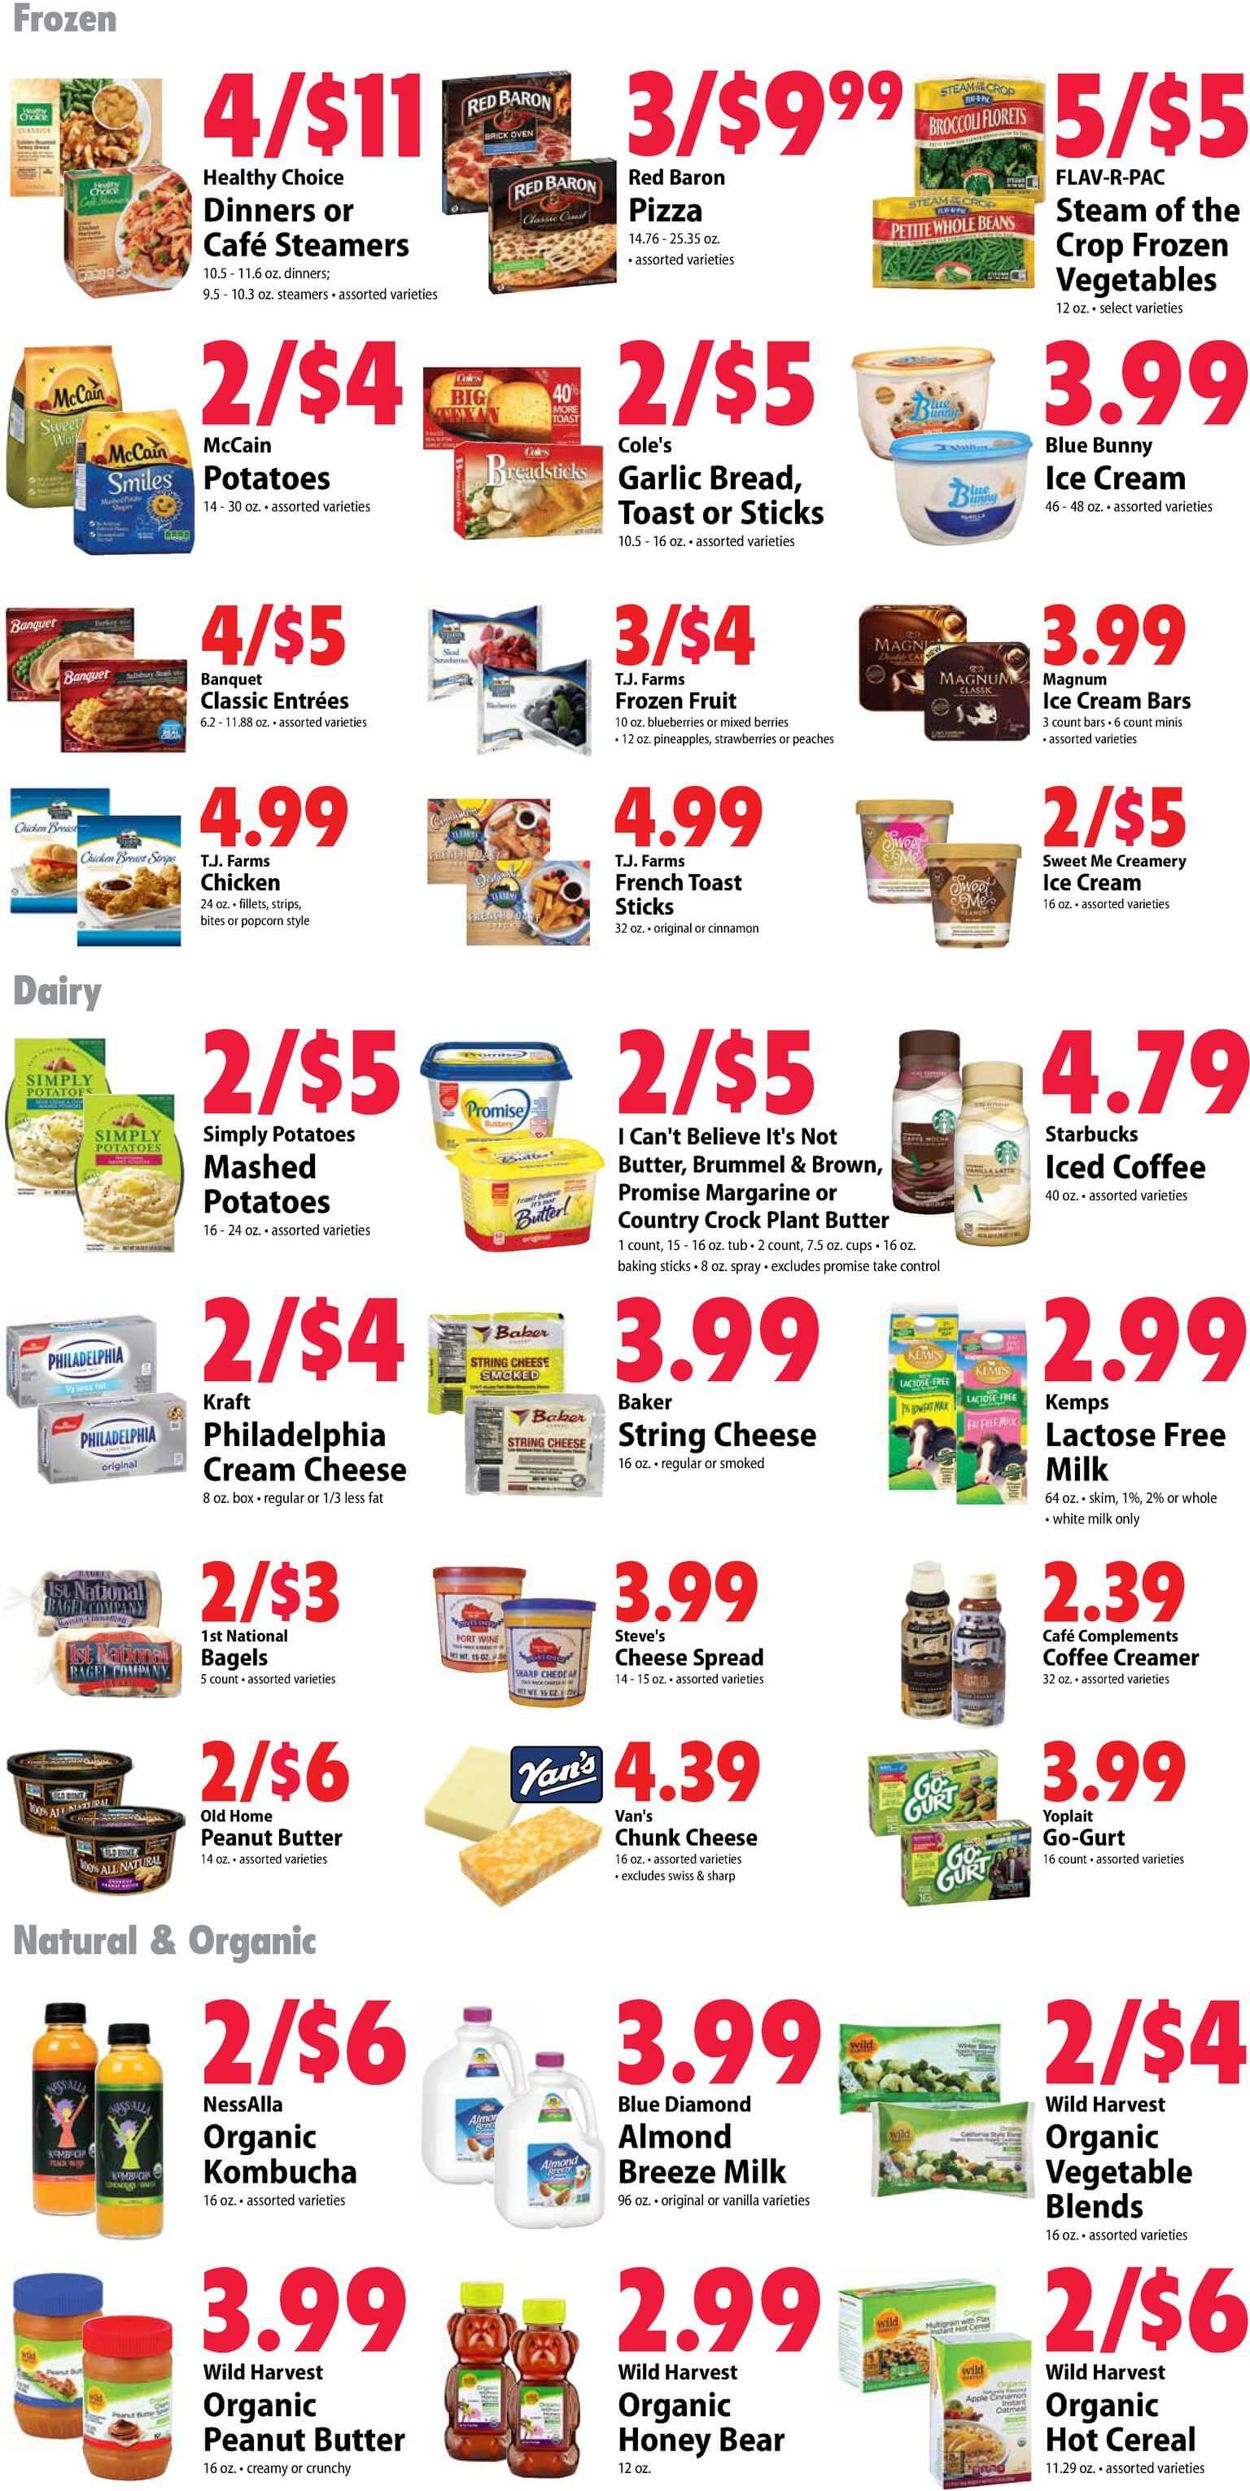 Festival Foods Current weekly ad 09/25 - 10/01/2019 [6] - frequent-ads.com